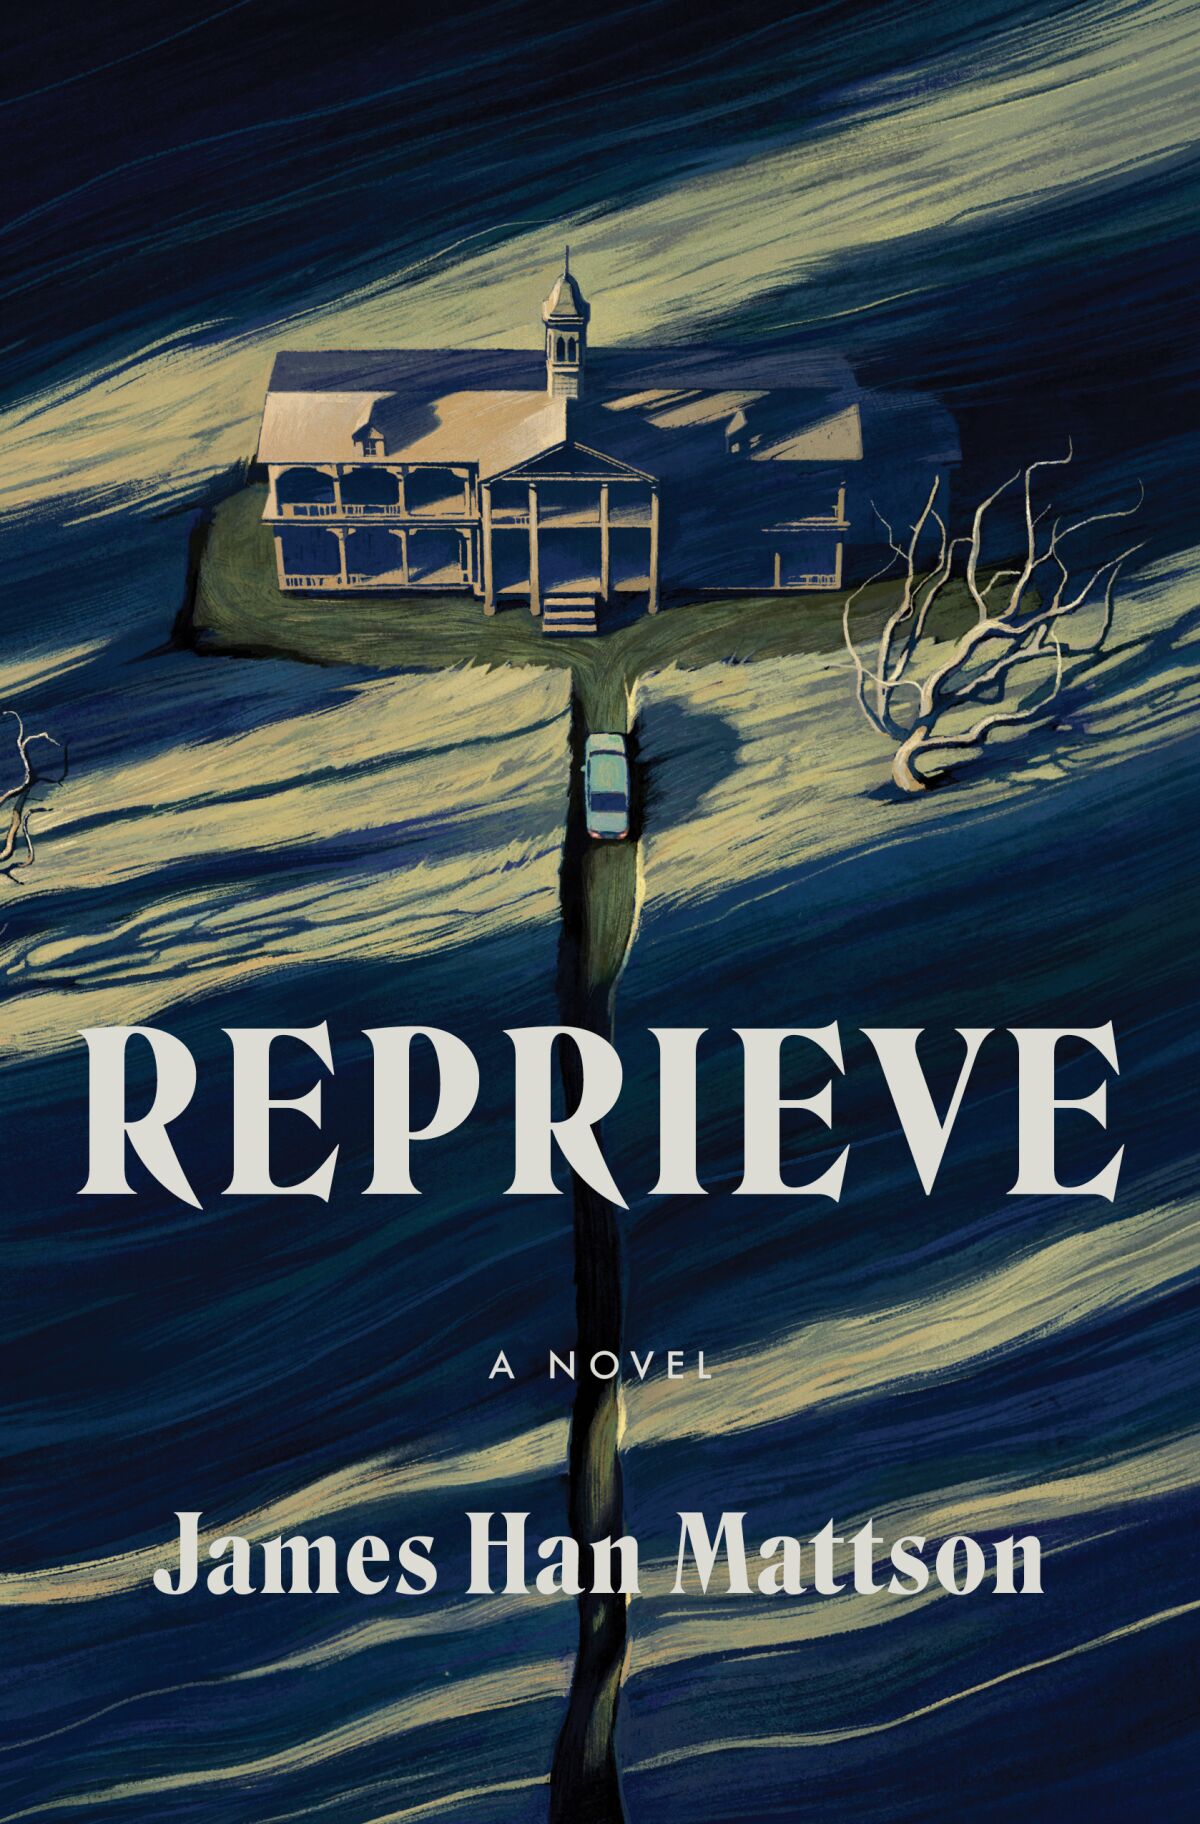 Book cover for "Reprieve" by James Han Mattson